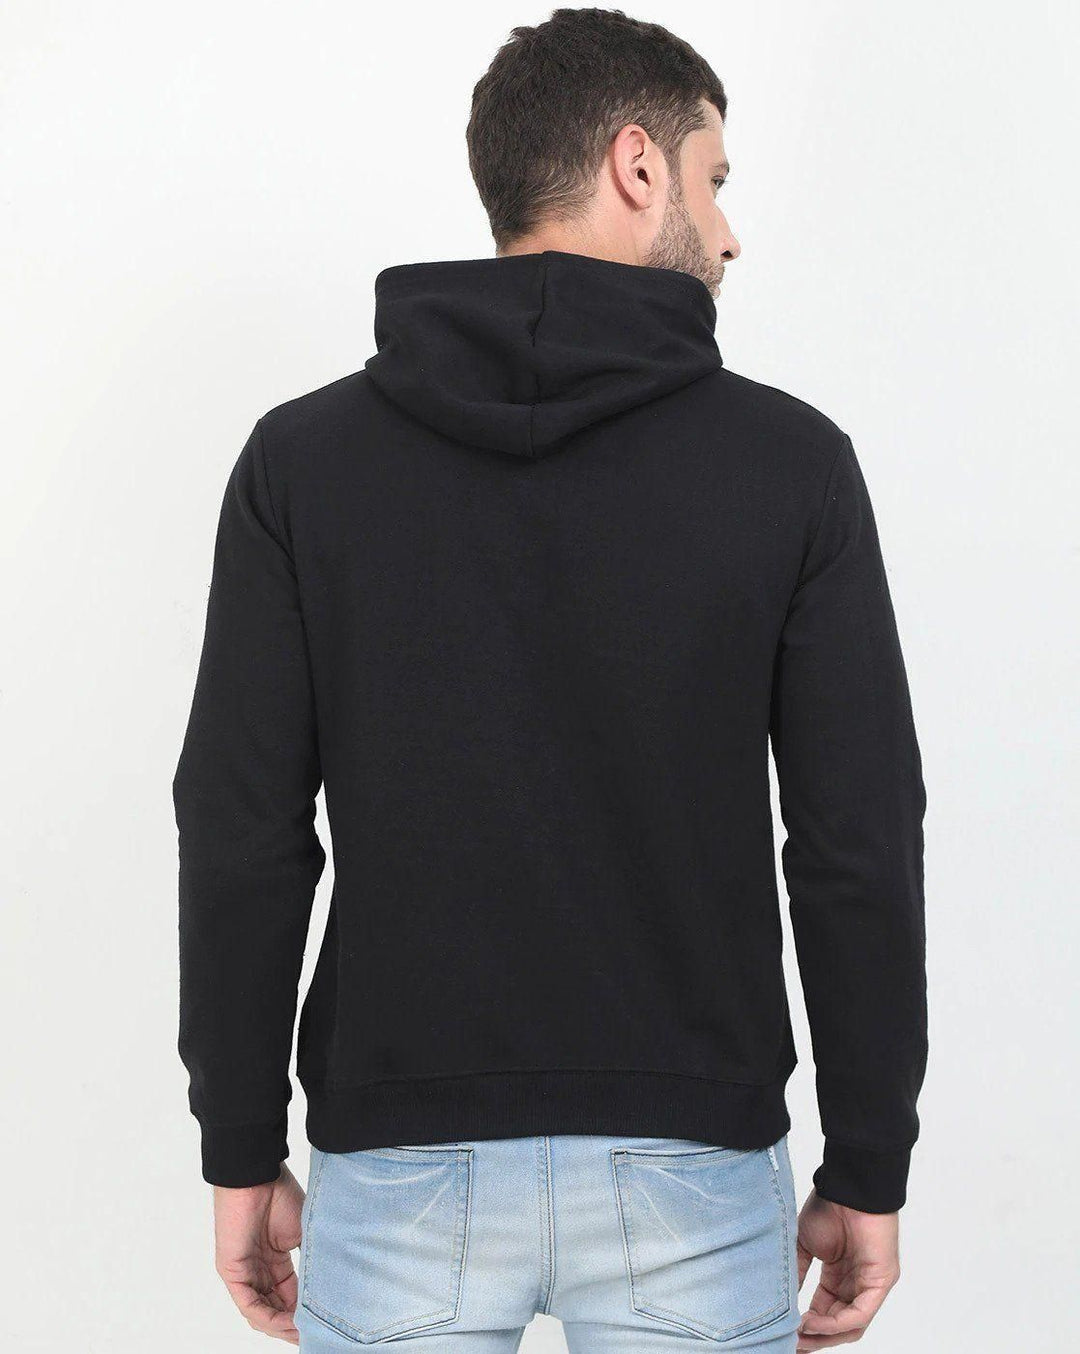 Cotton Blend Printed Full Sleeves Mens Hooded Neck T-Shirt